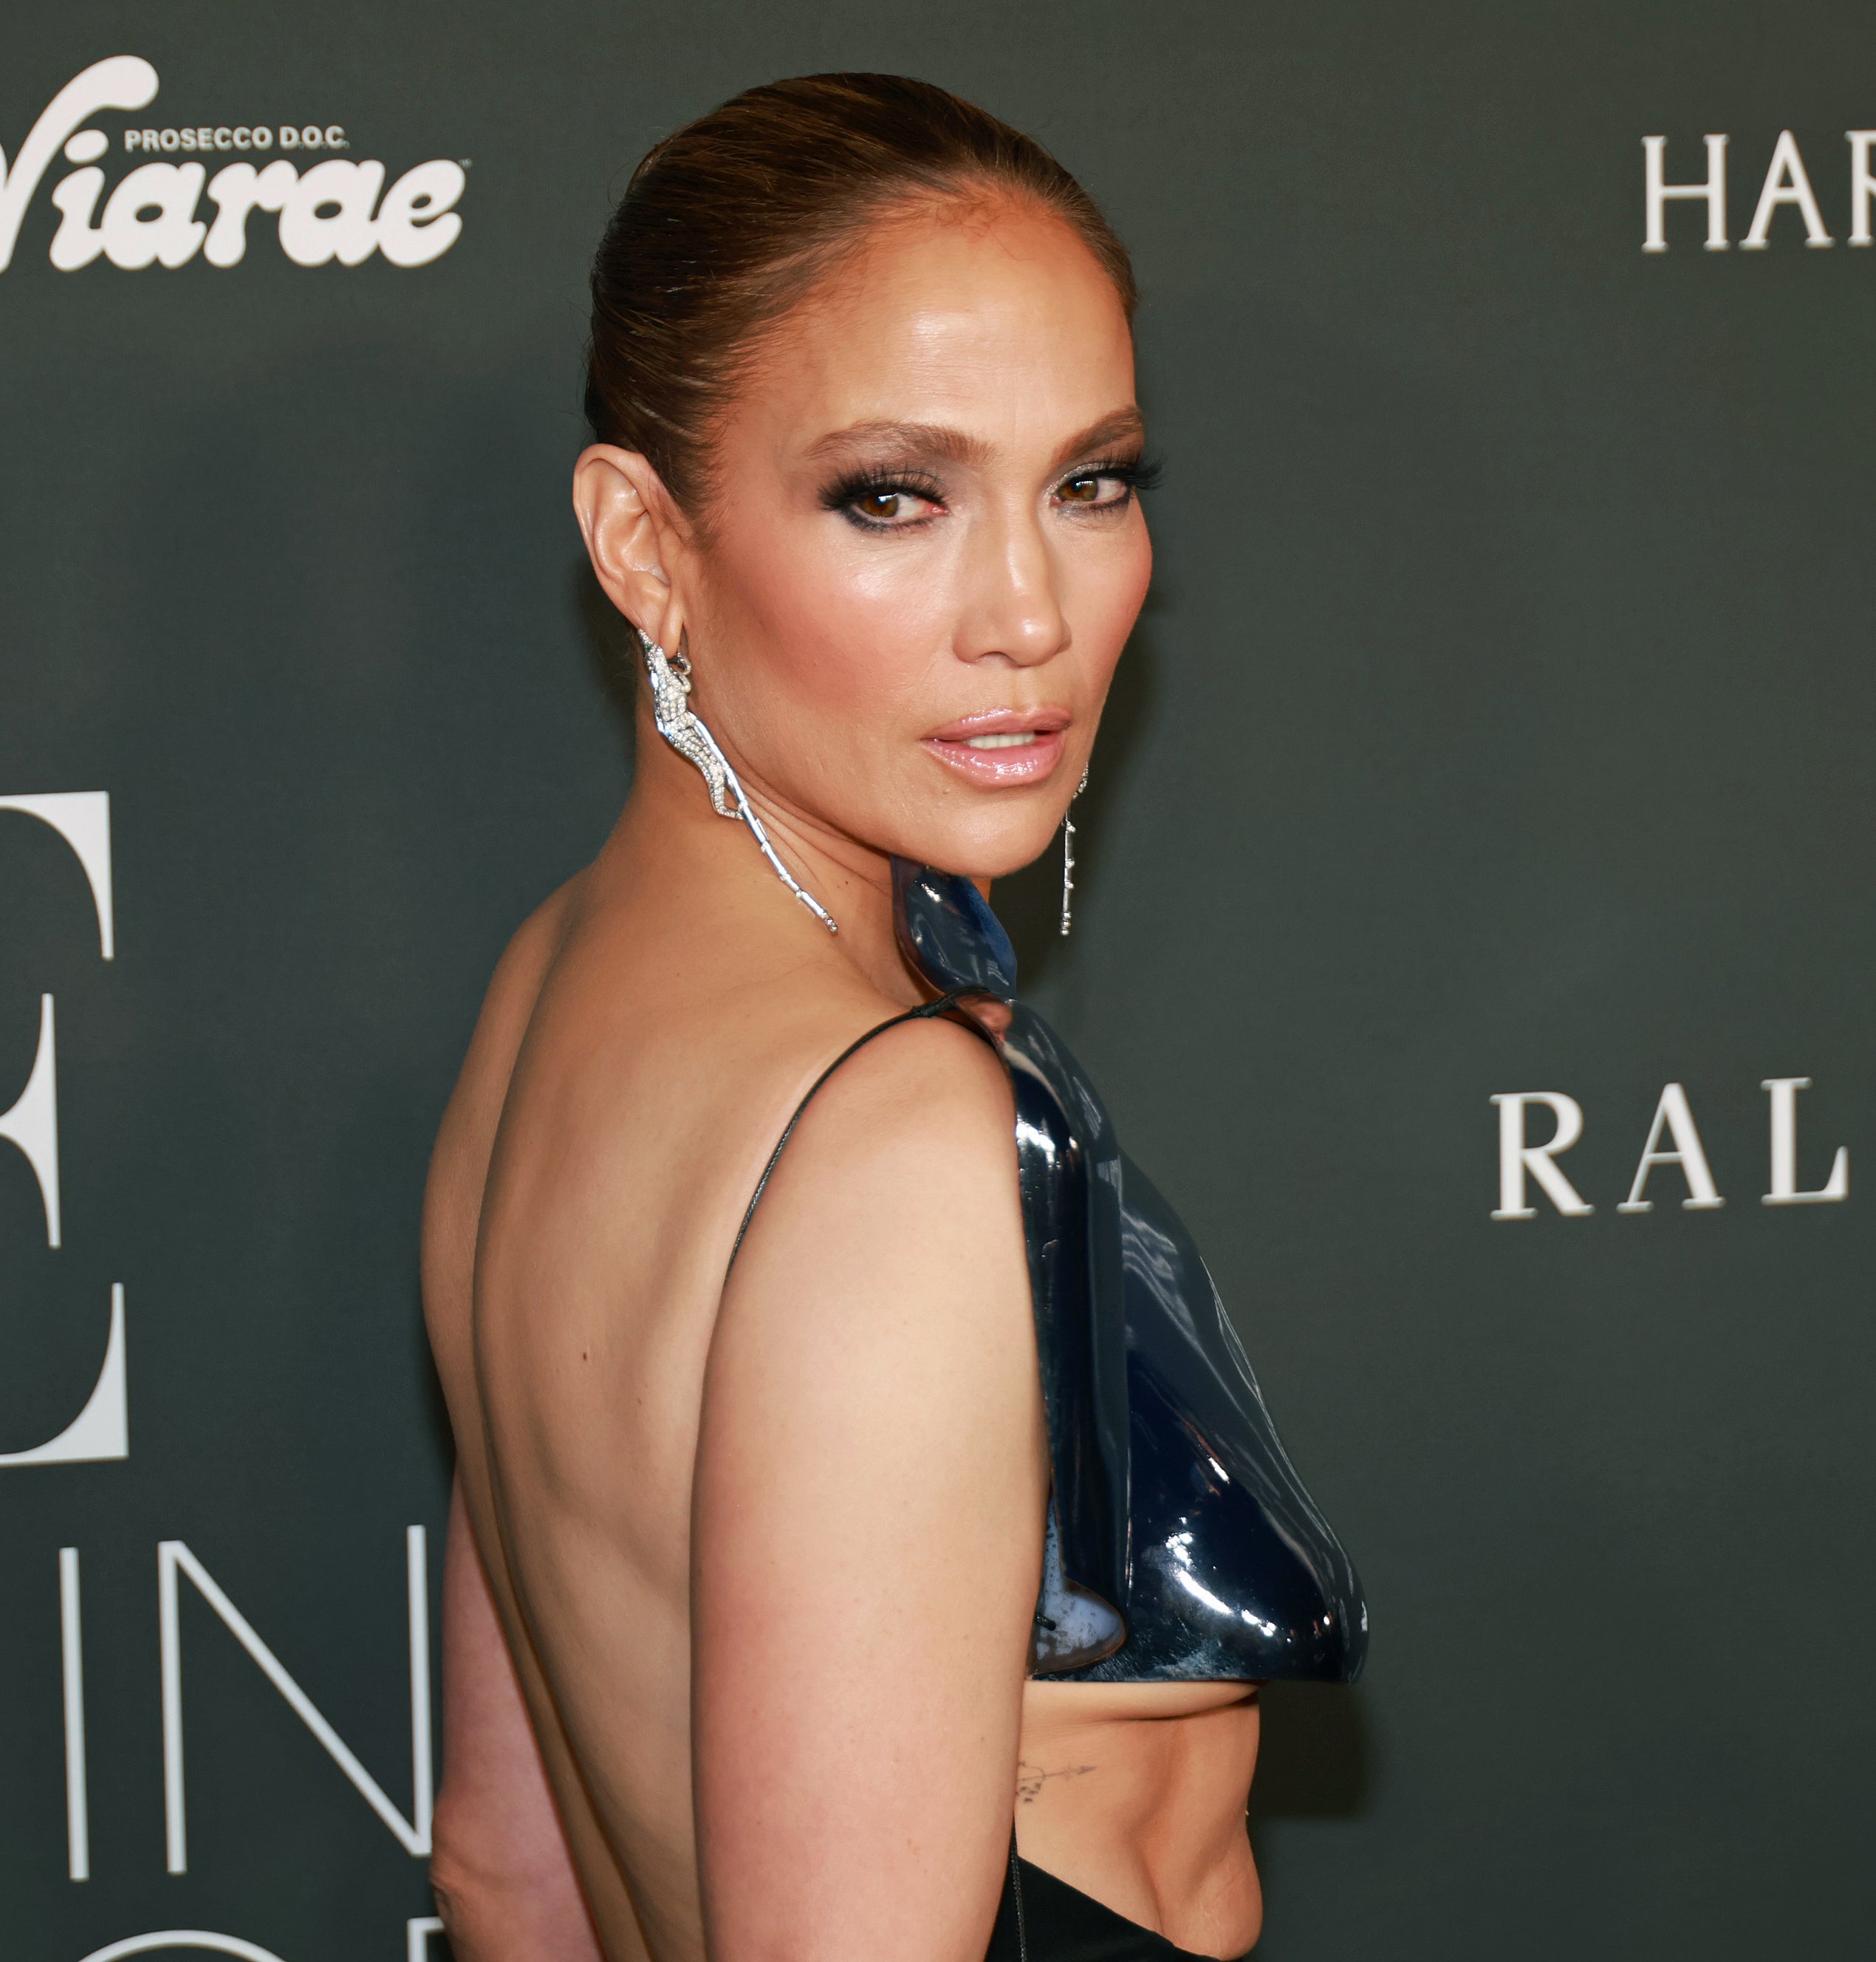 Close-up of JLo at a media event in a backless outfit